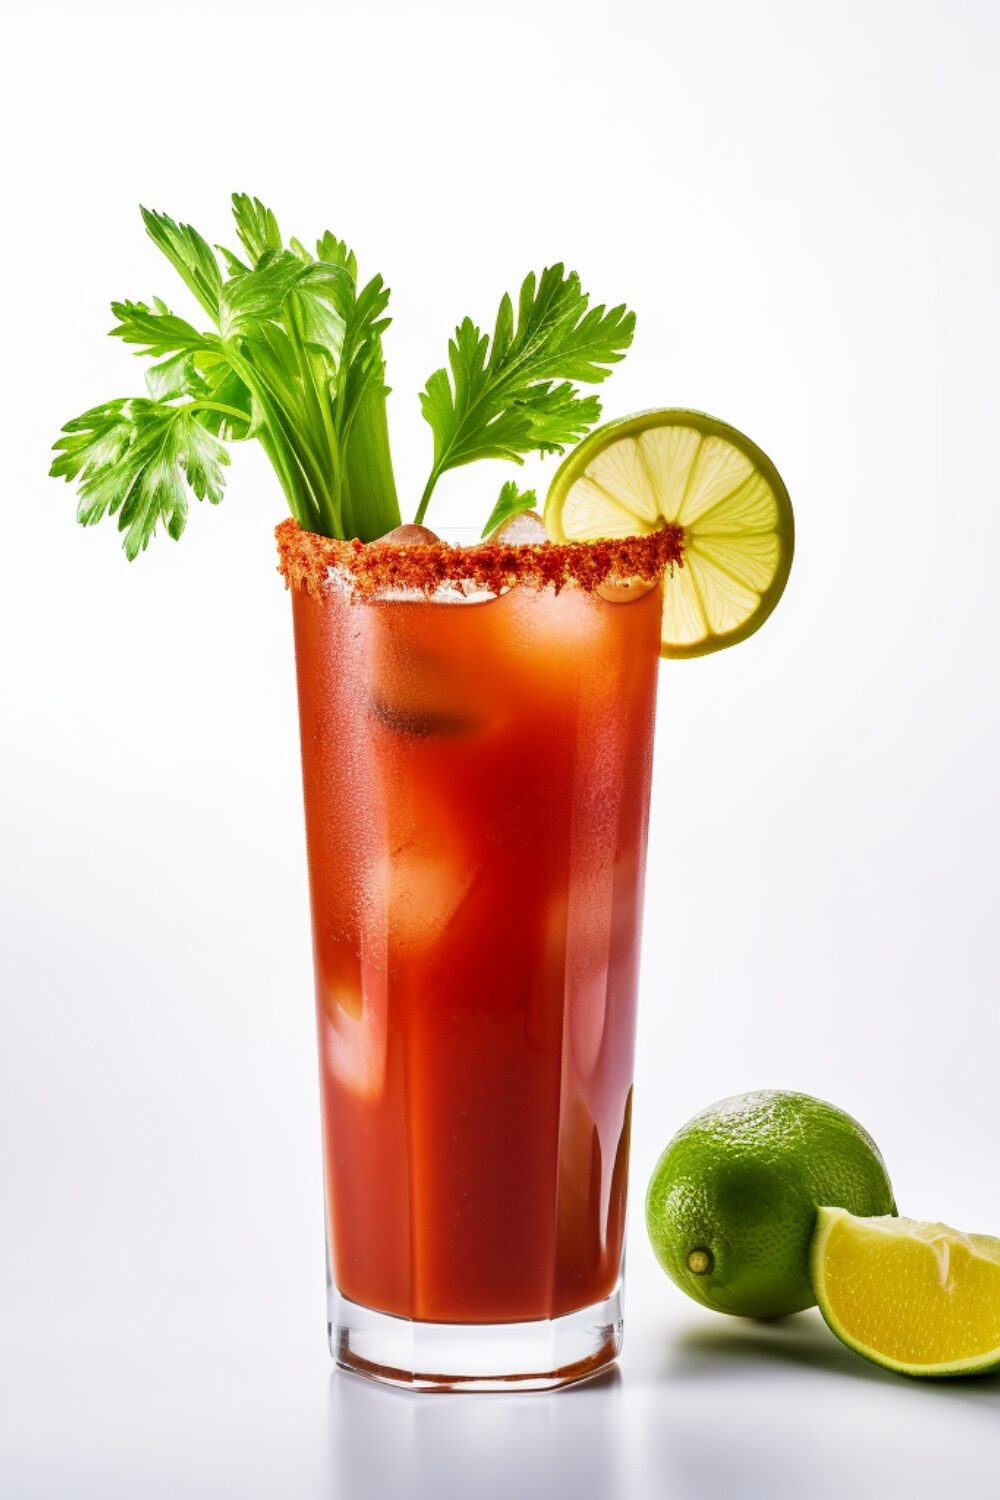 A tall glass filled with a rich tomato-based Virgin Mary, accompanied by a stick of celery and a lemon wedge.